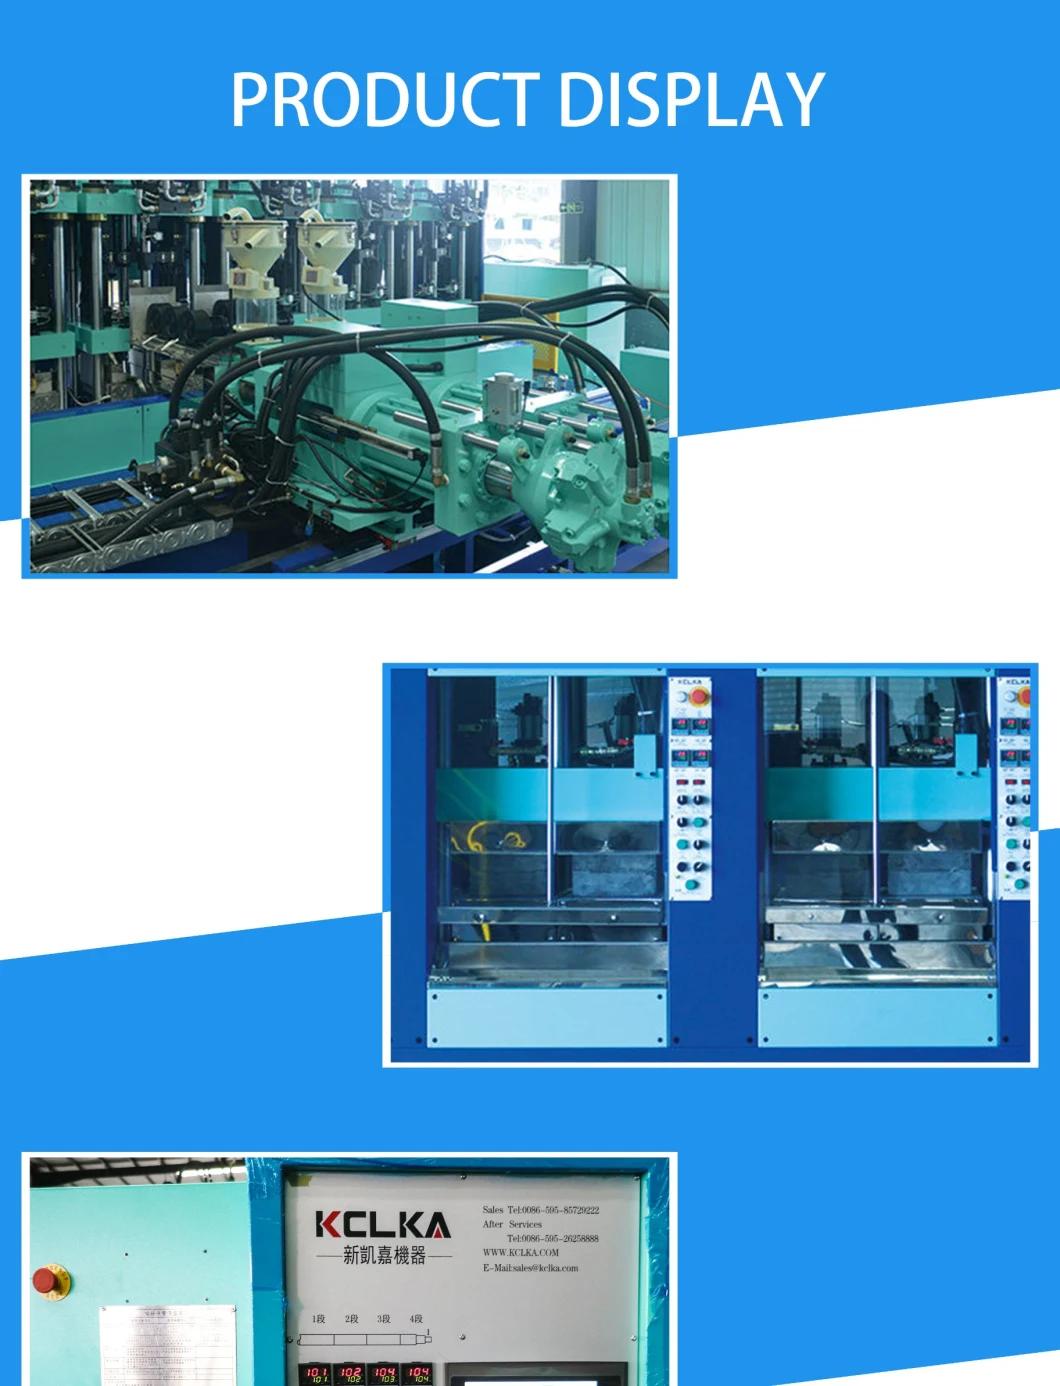 Brand New Full Automatic Foam EVA Double Color Injection Molding Machine with CE Certification